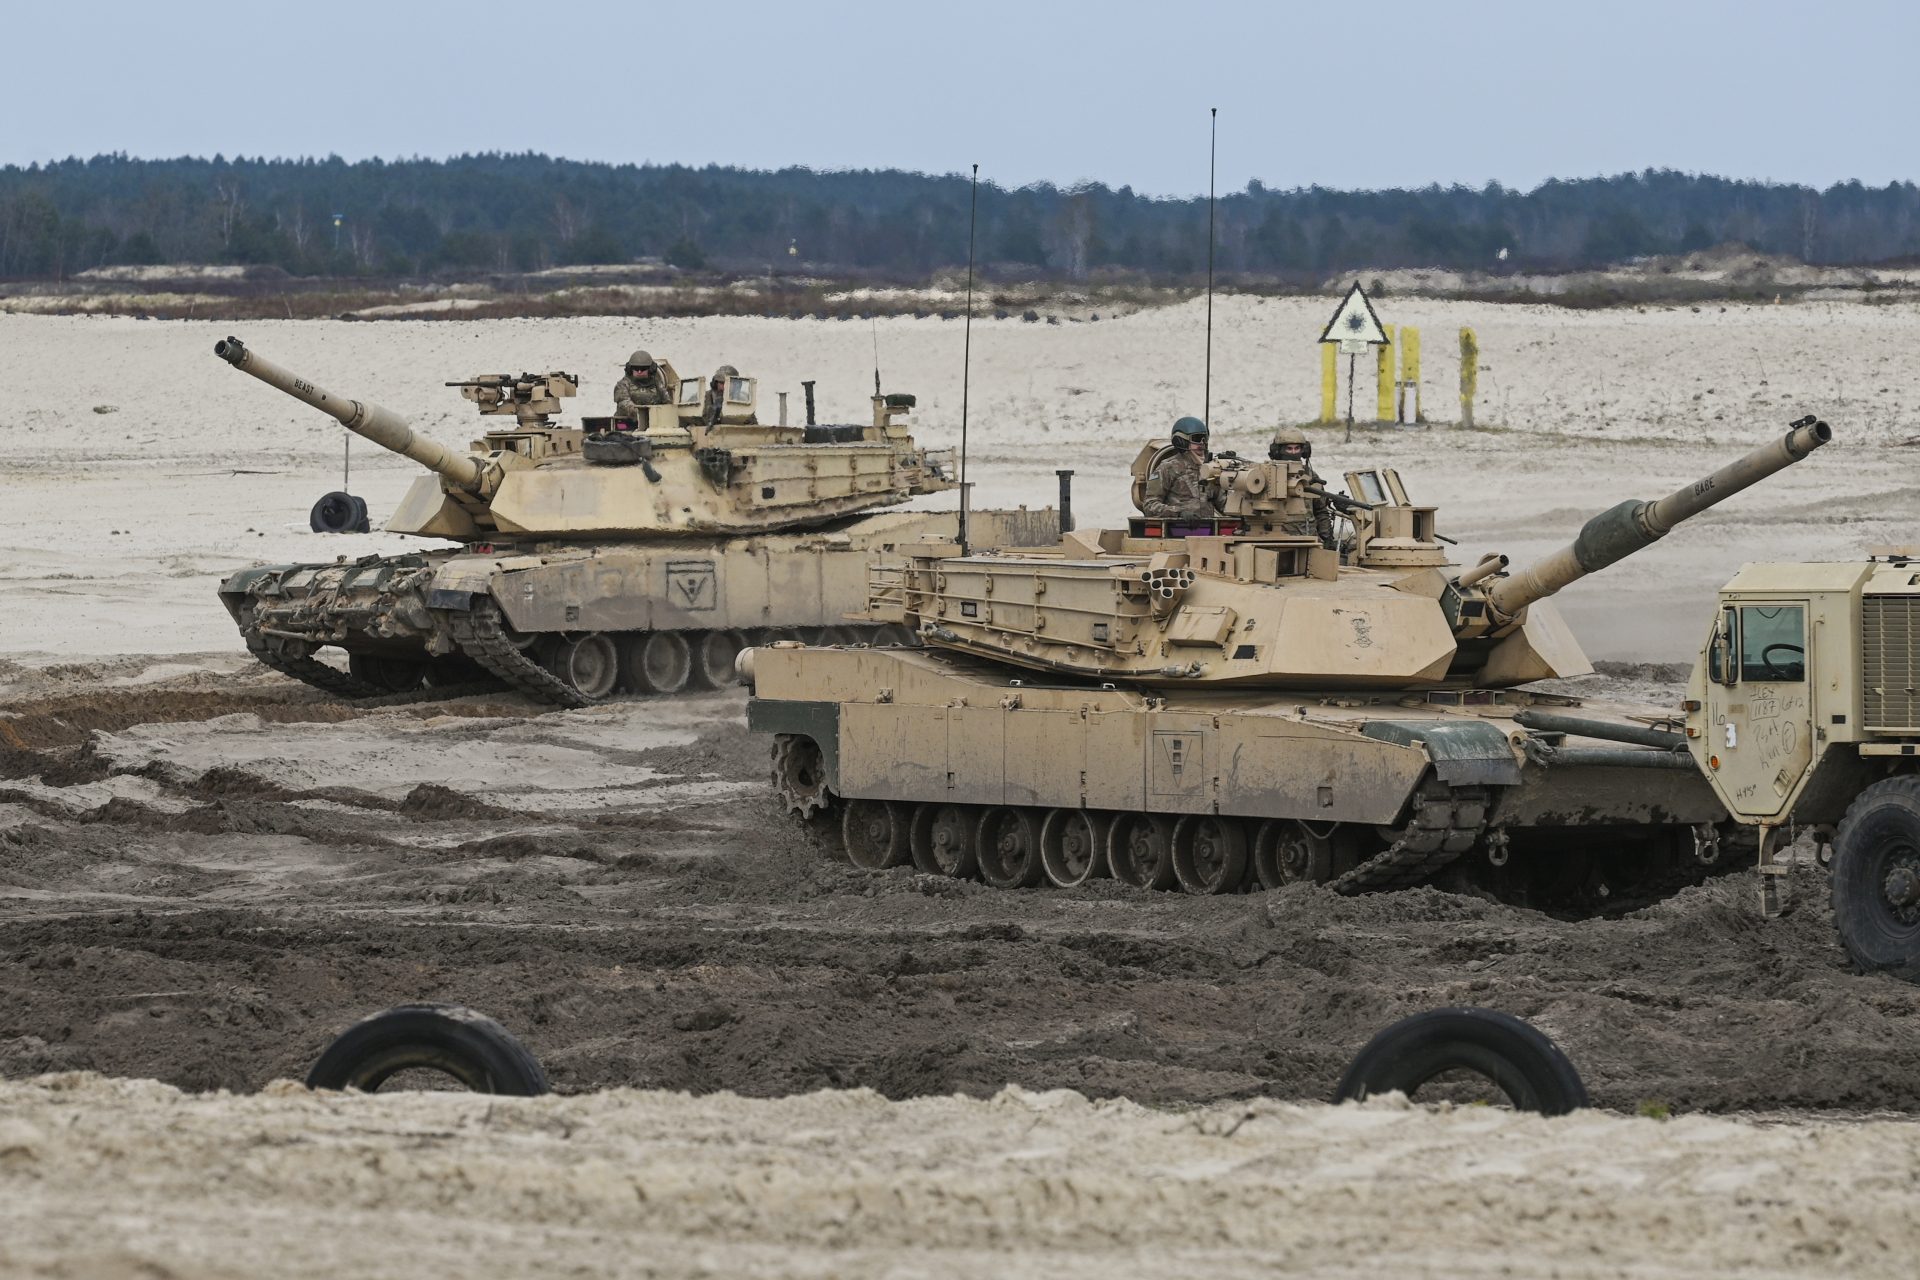 This American tank could break Russia’s defense